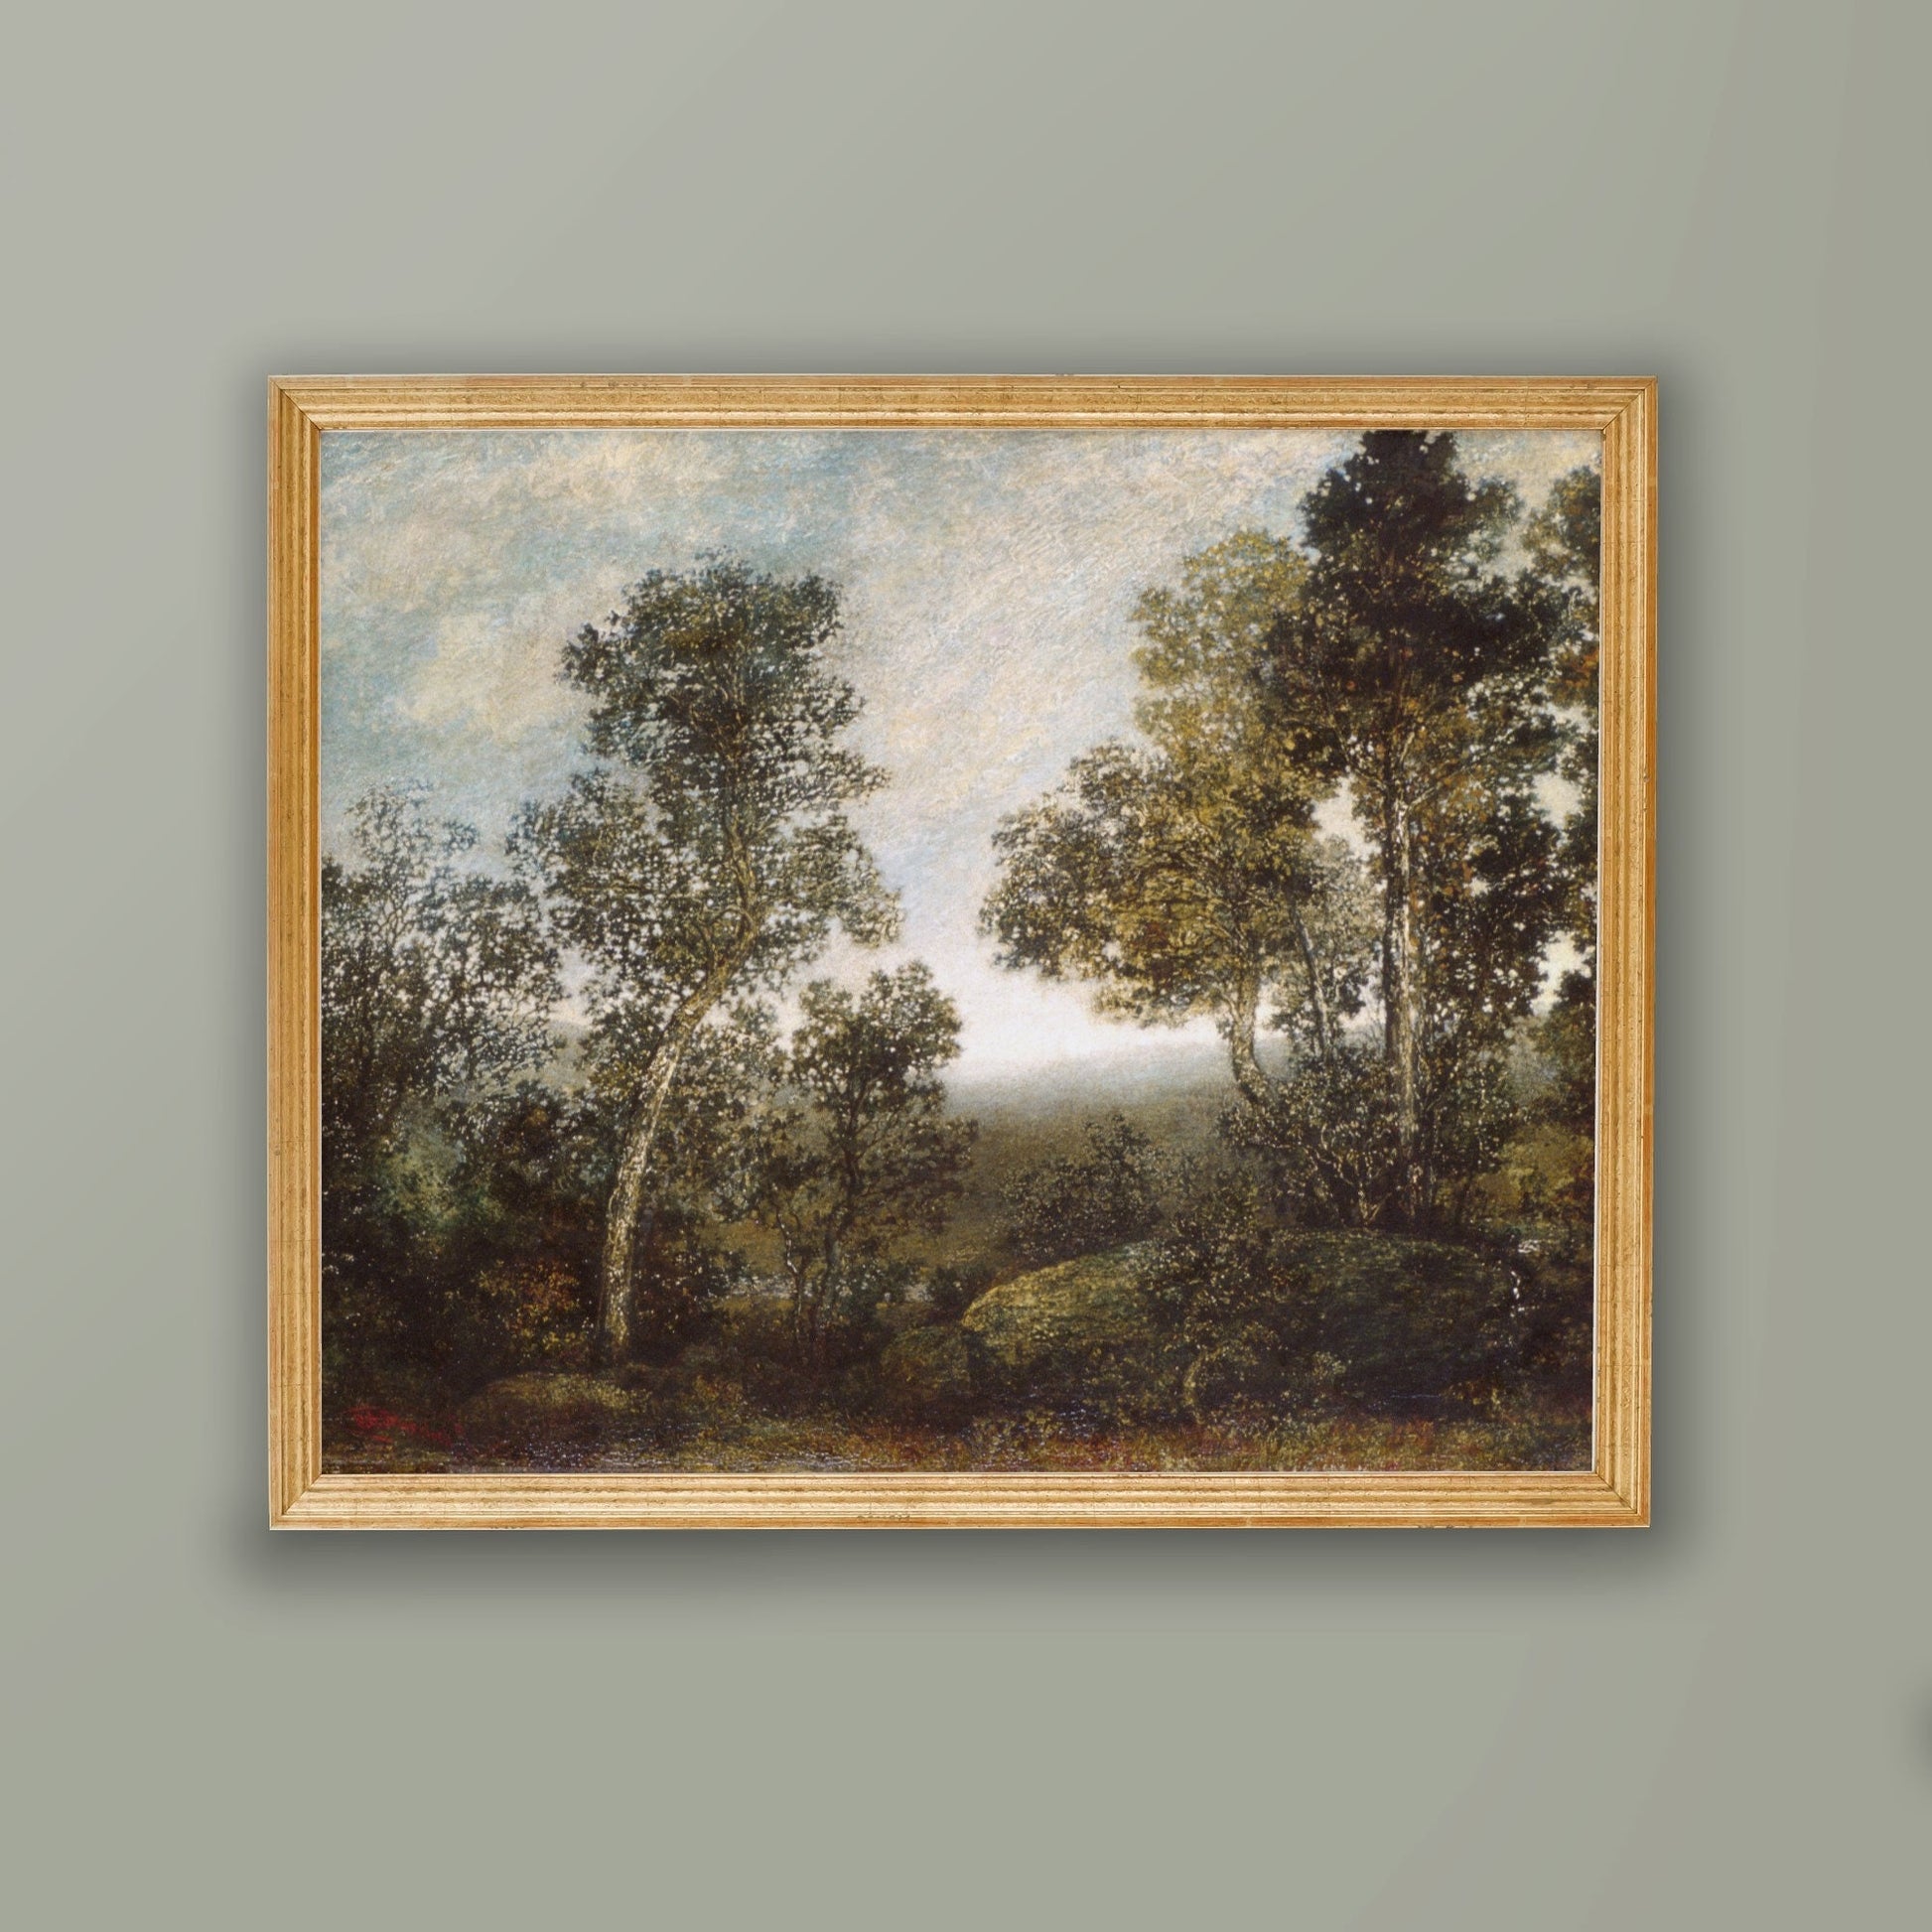 Vintage Landscape Wall Art by American Painter 